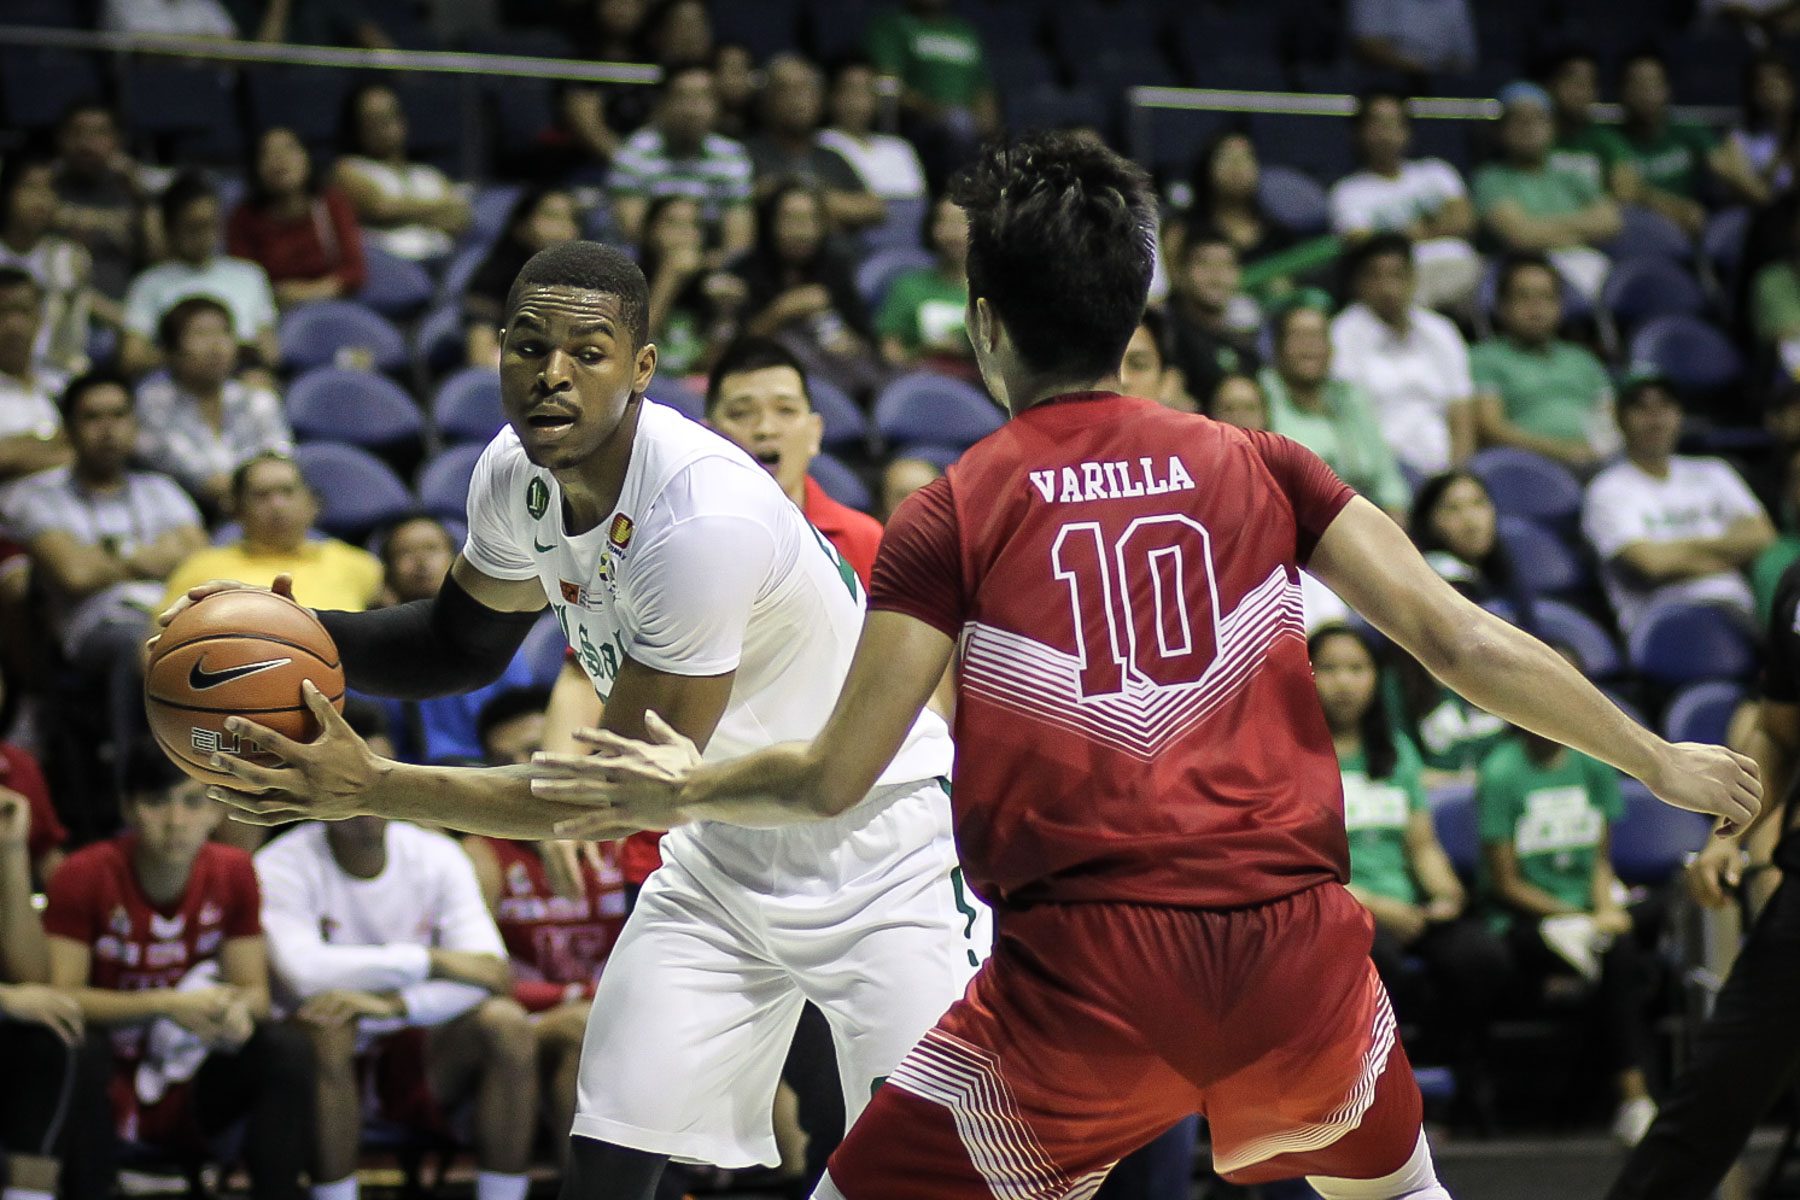 Mbala dominates stat sheet as La Salle moves up to 12-0